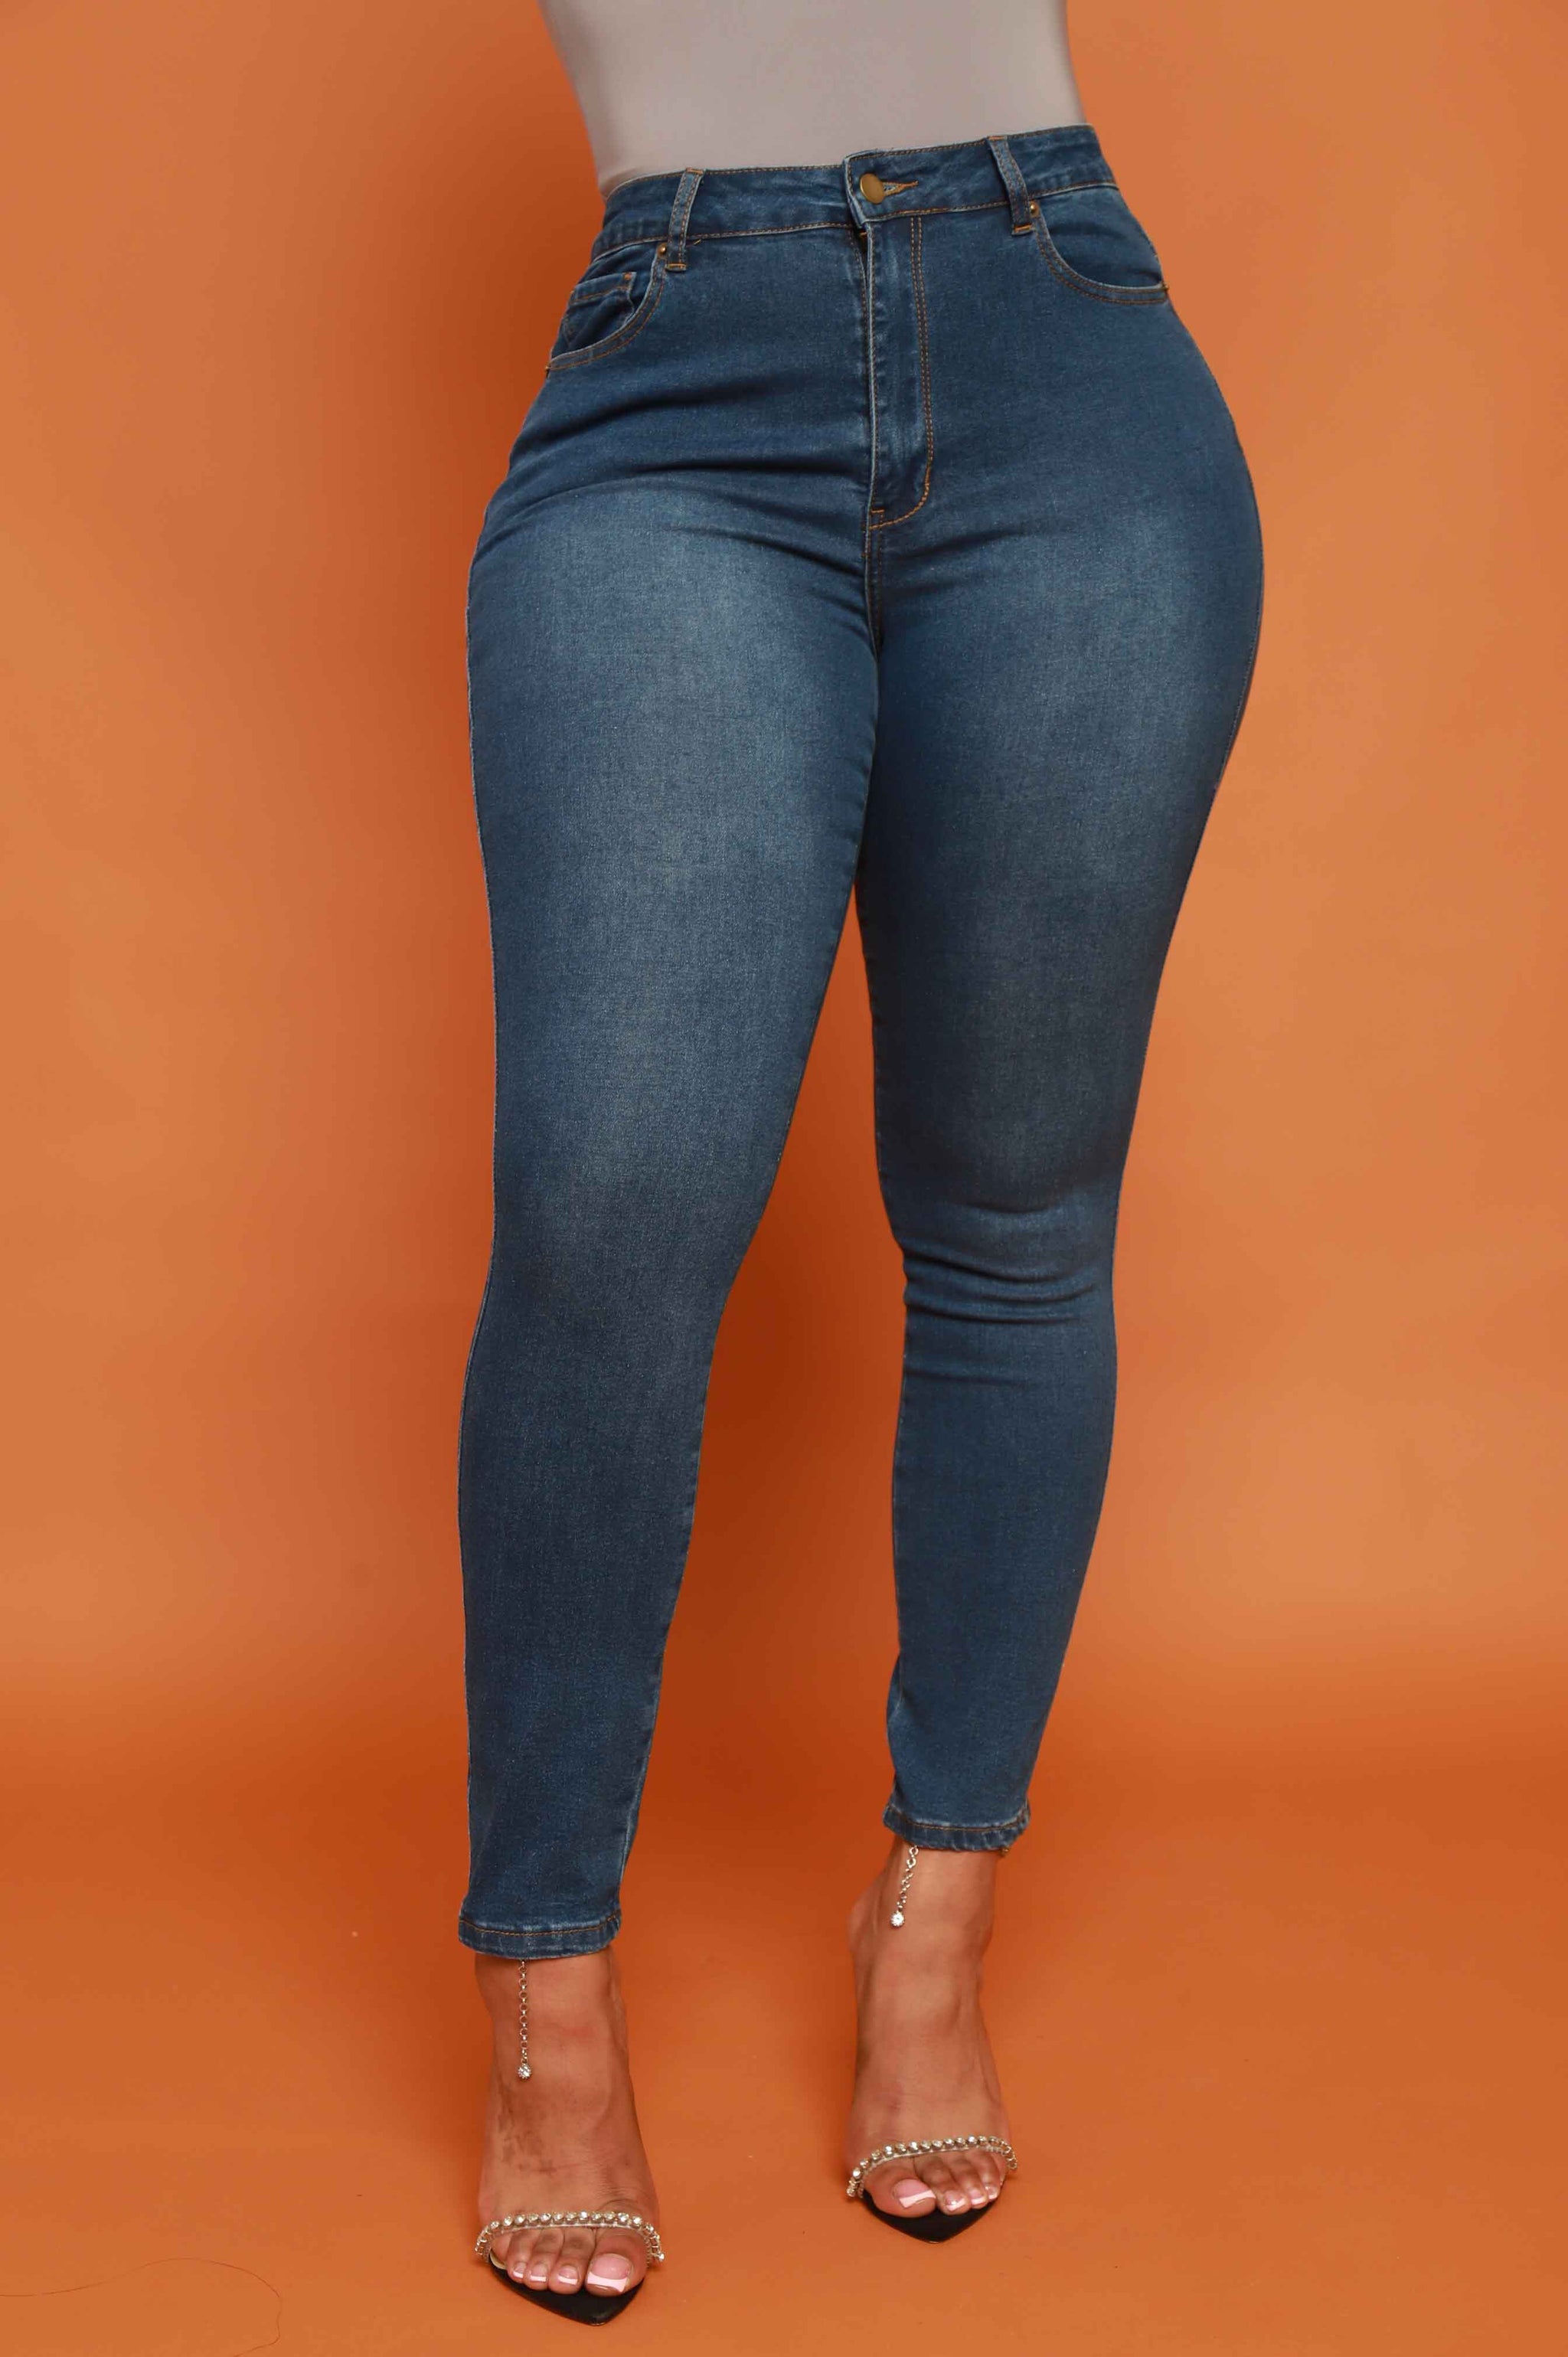 $7.99 Been Awhile Hourglass High Rise Stretchy Jeans - Medium Wash ...